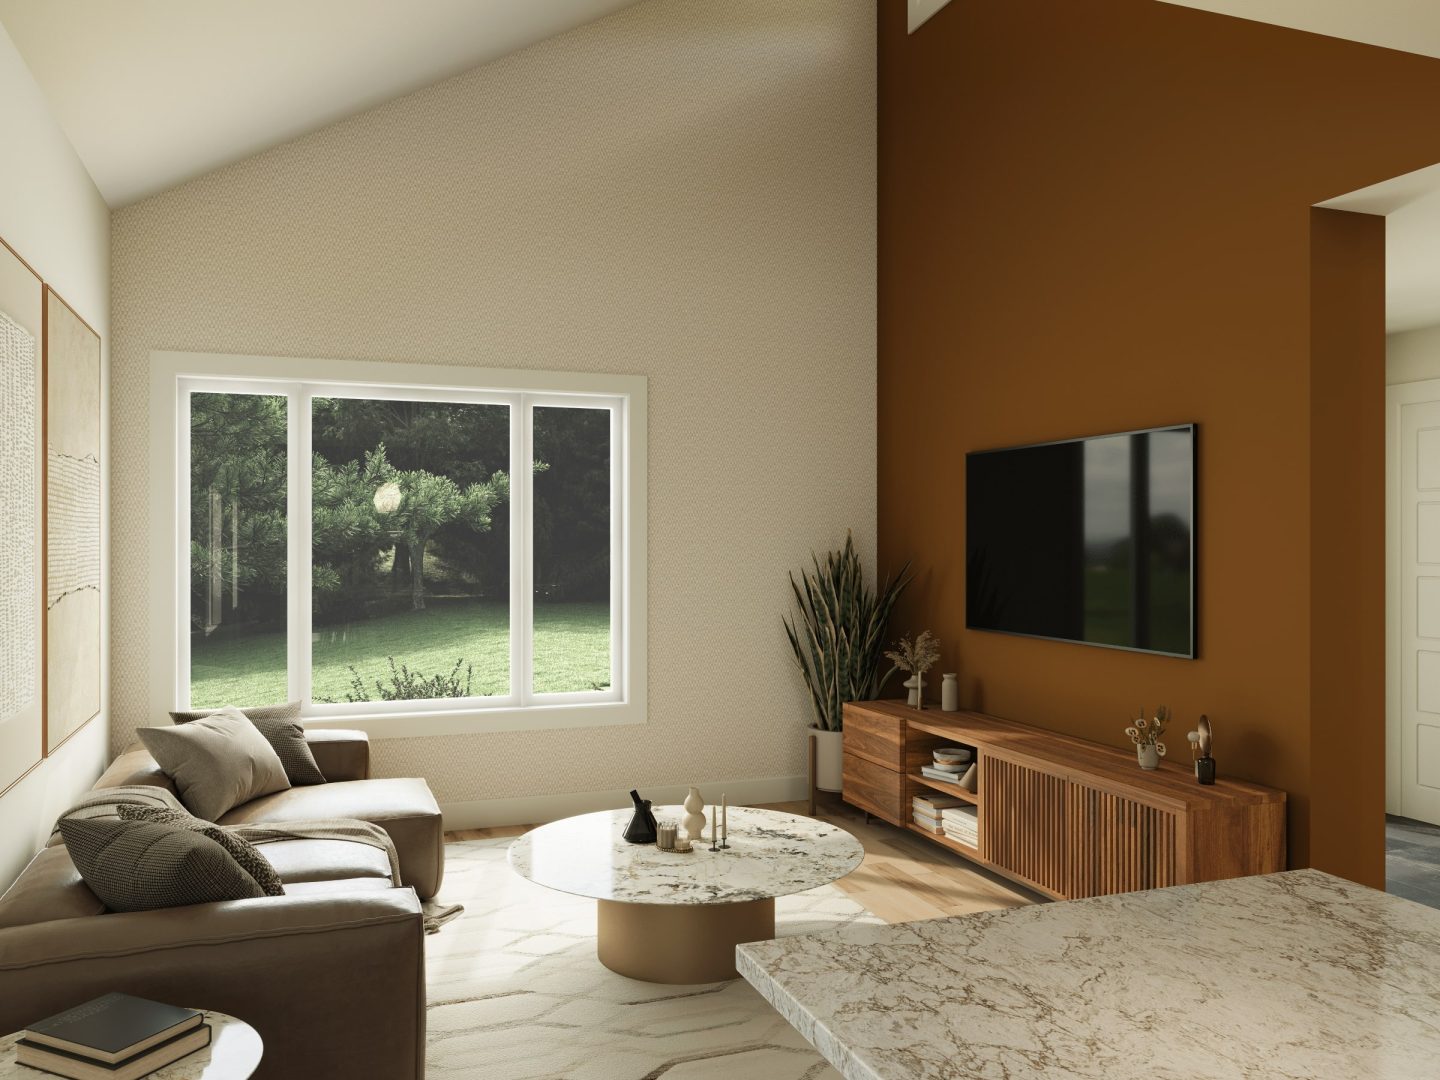 The Svalla model is a midcentury-style chalet. Living room view